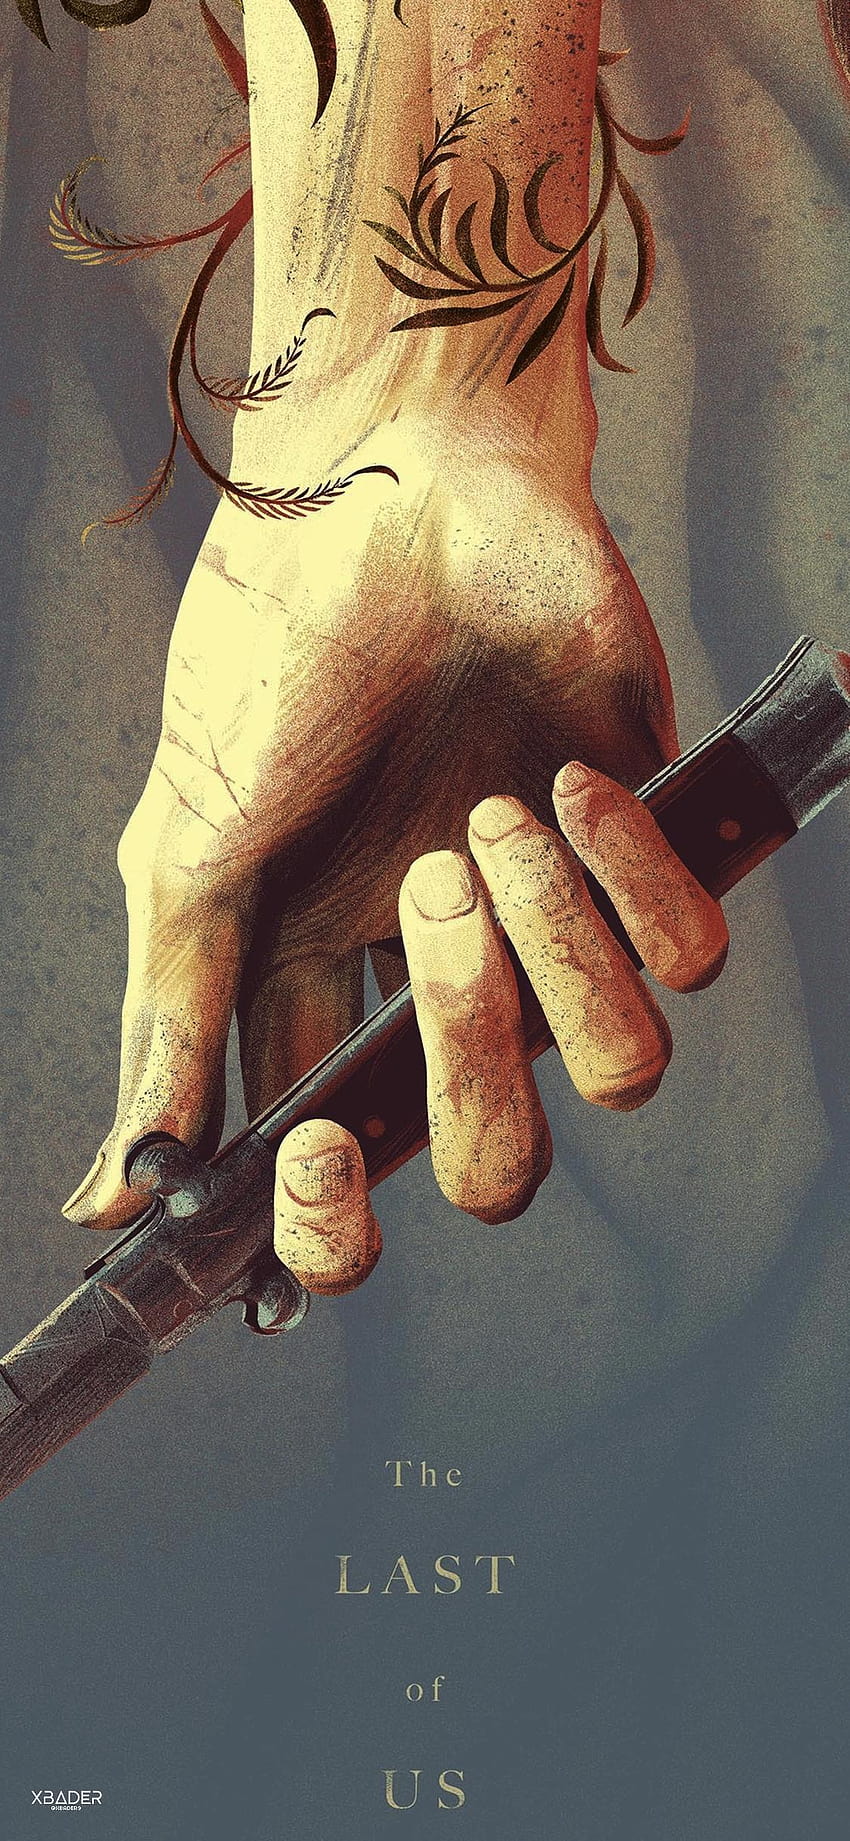 THE LAST OF US PART 2, the last of us iphone HD phone wallpaper